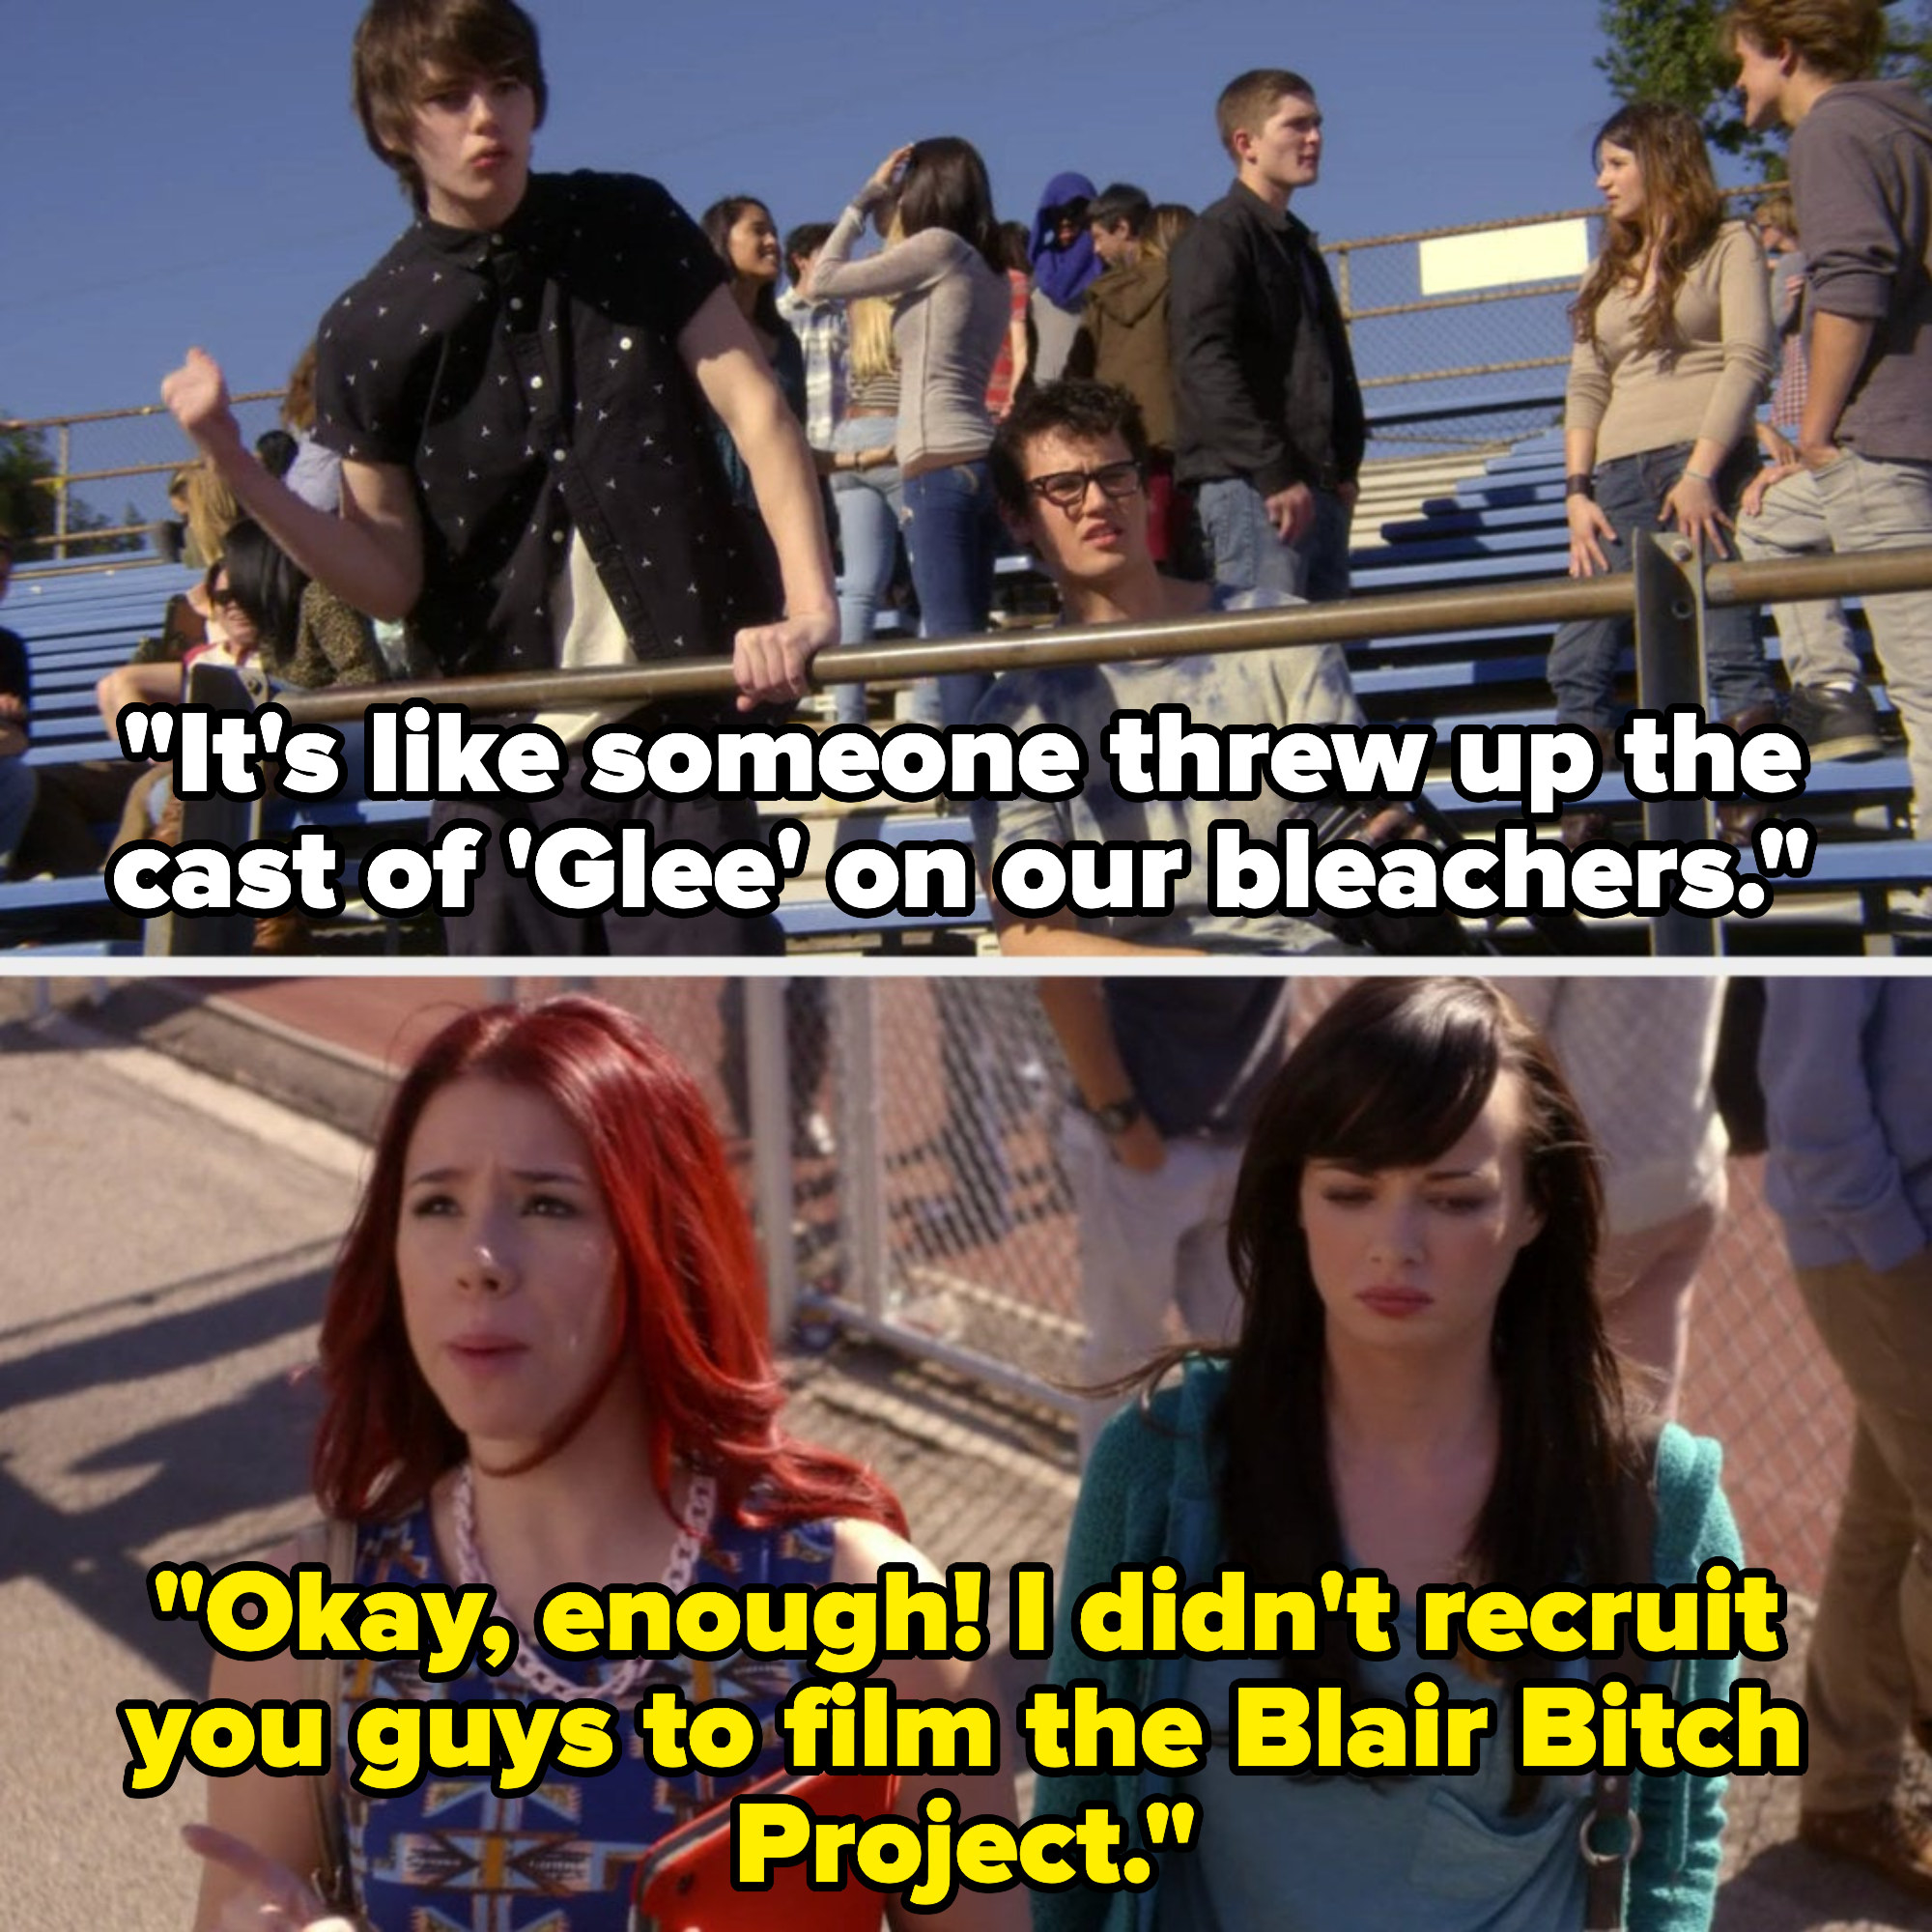 Theo and Cole say &quot;It&#x27;s like someone threw up the cast of &#x27;Glee&#x27; on our bleachers&quot; and Tamera says &quot;Okay, enough! I didn&#x27;t recruit you guys to film the Blair Bitch Project&quot;